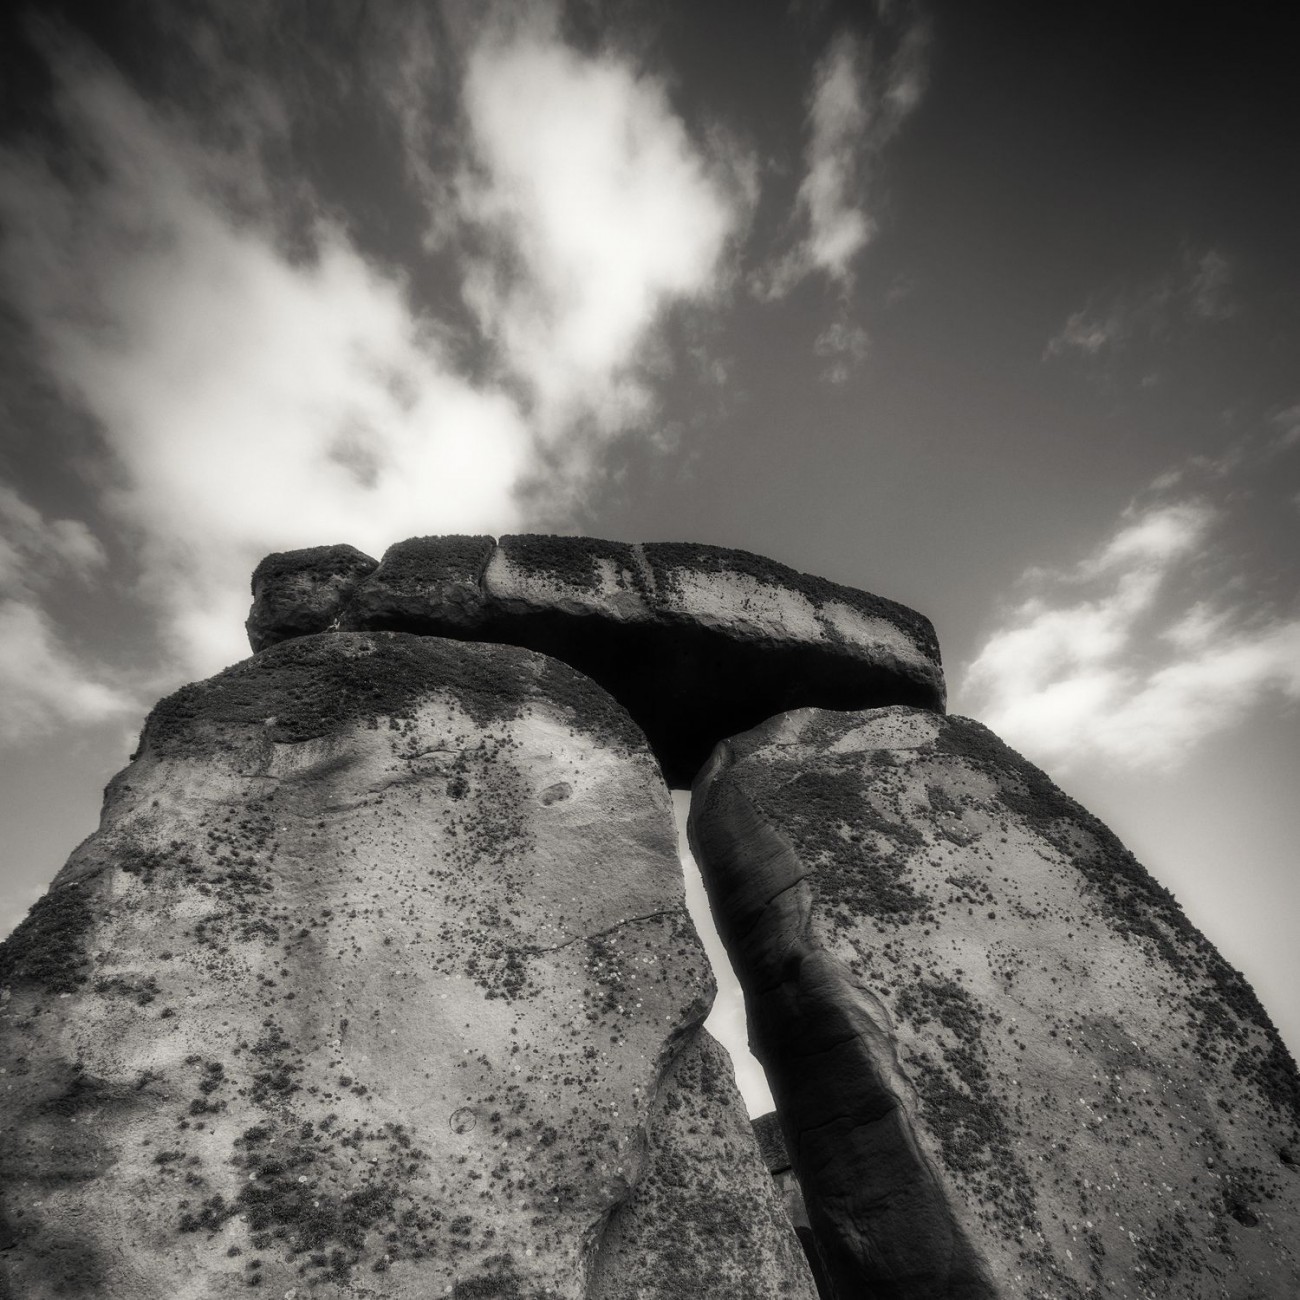 Monoliths and clouds, Stonehenge, England, 2012